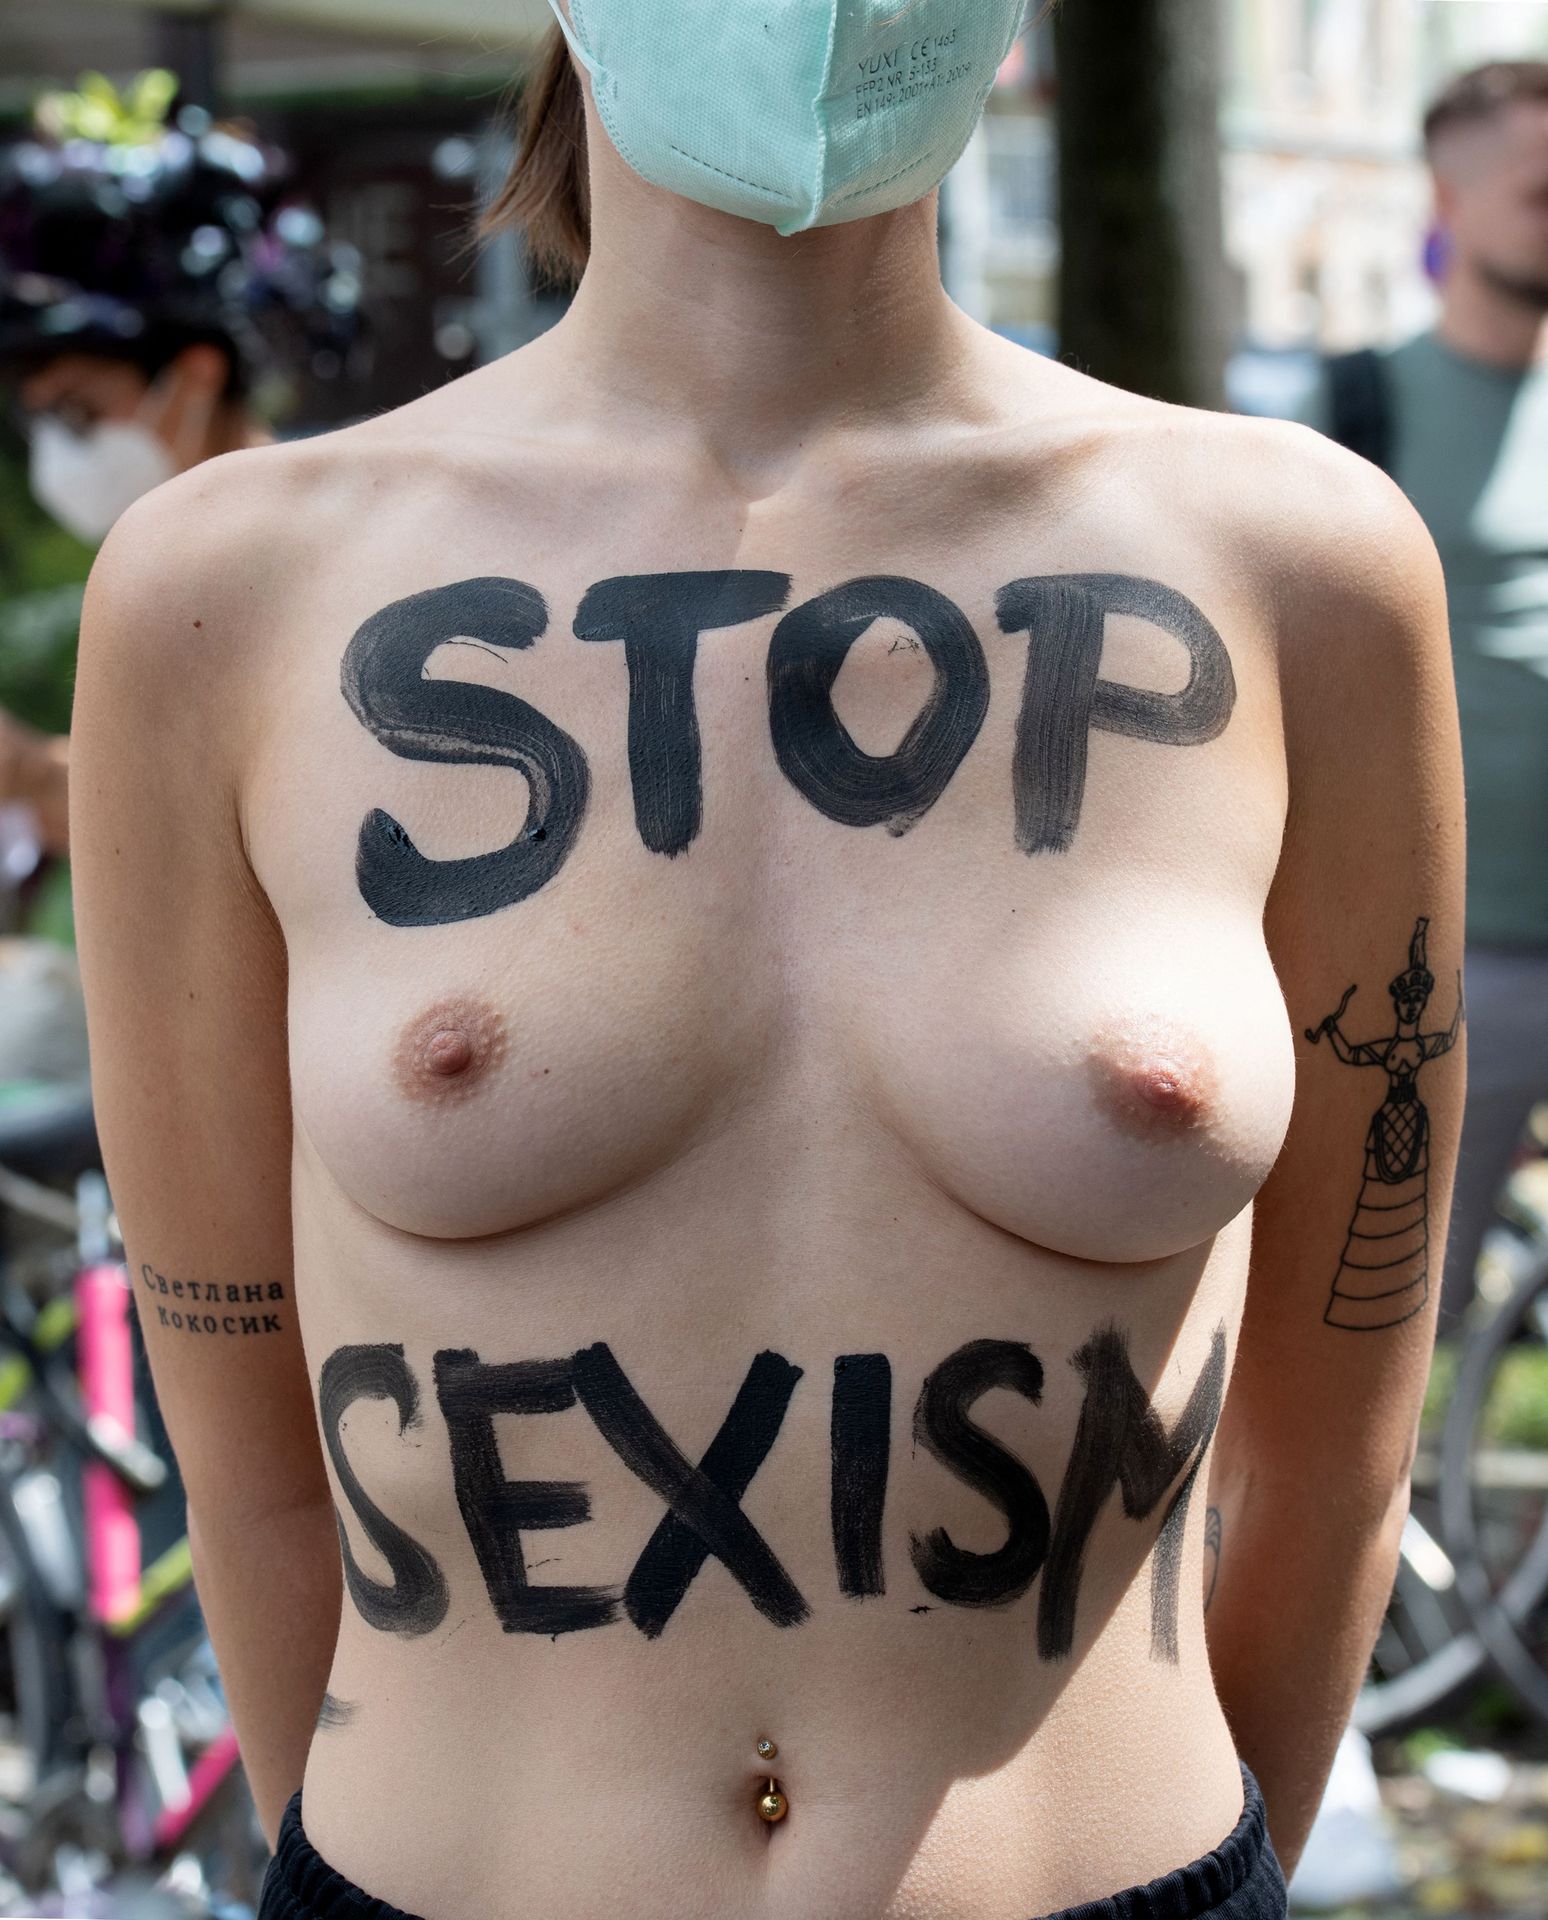 Topless-Protest-The-Fappening-Blog-30.jpg